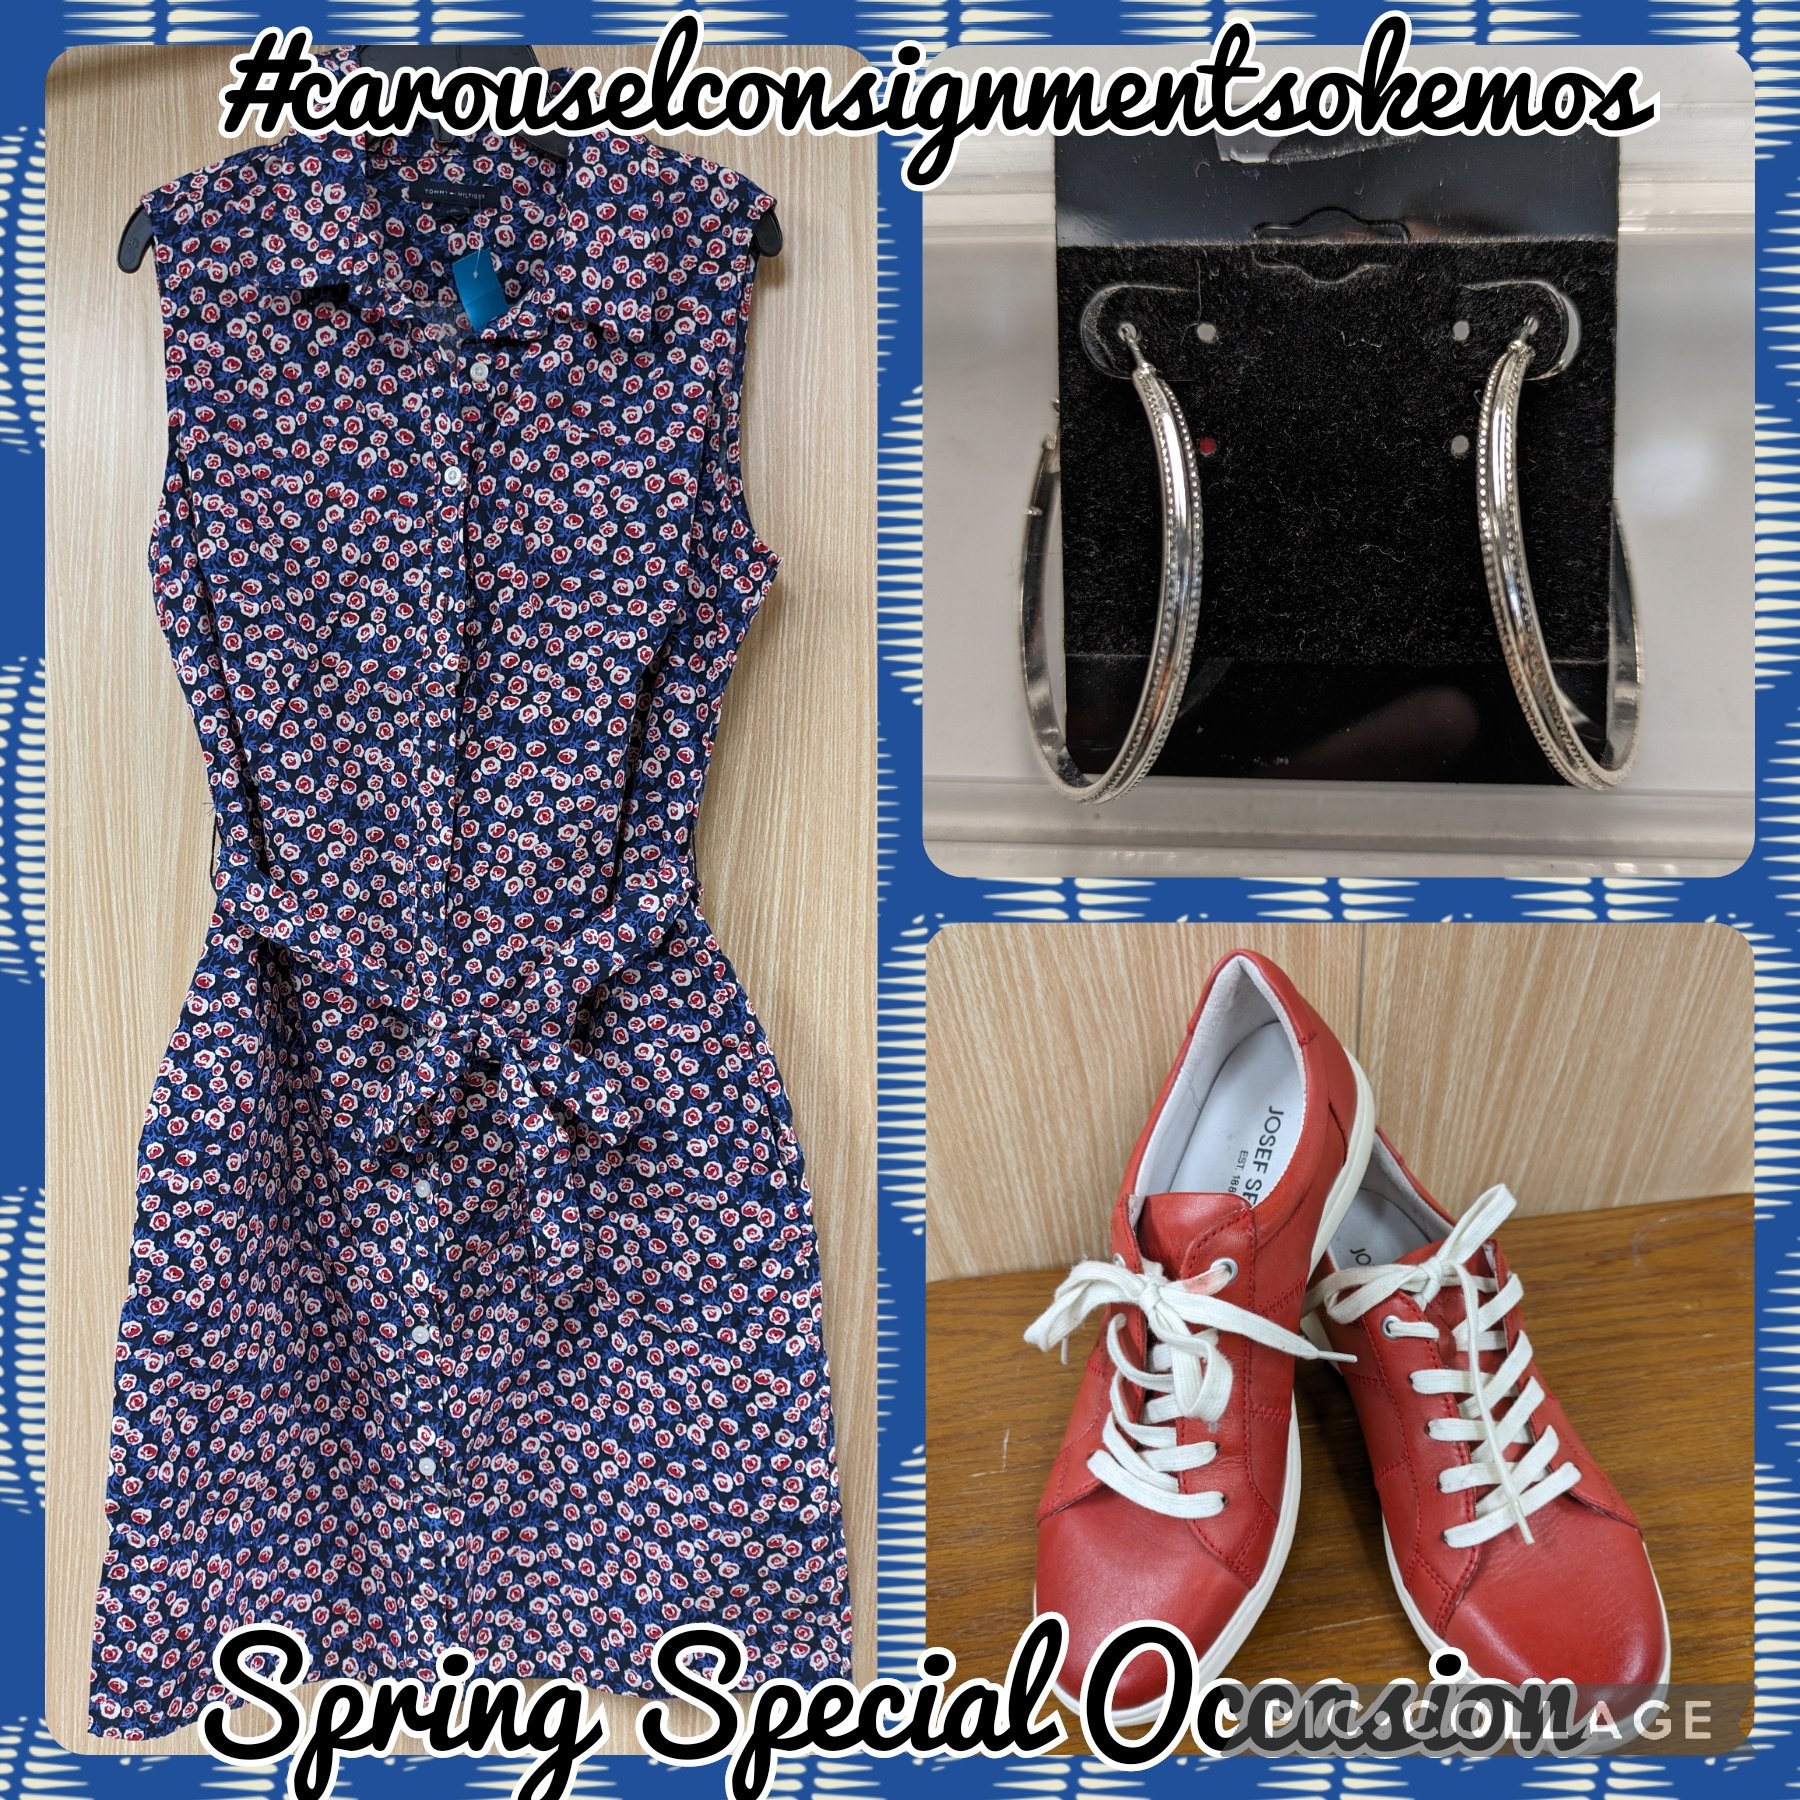 💐Spring Special Occasion💐
Tommy Hilfiger Shirt Dress Size 10 $18
Bright Shoes-Josef Seibel Size 7 $33
Silver Hoop Earrings $6
#carouselconsignmentsokemos #shoplocal #shopsmall #shopsmallbusiness #resalenotretail #shopconsignment #shopsecondhand #pr